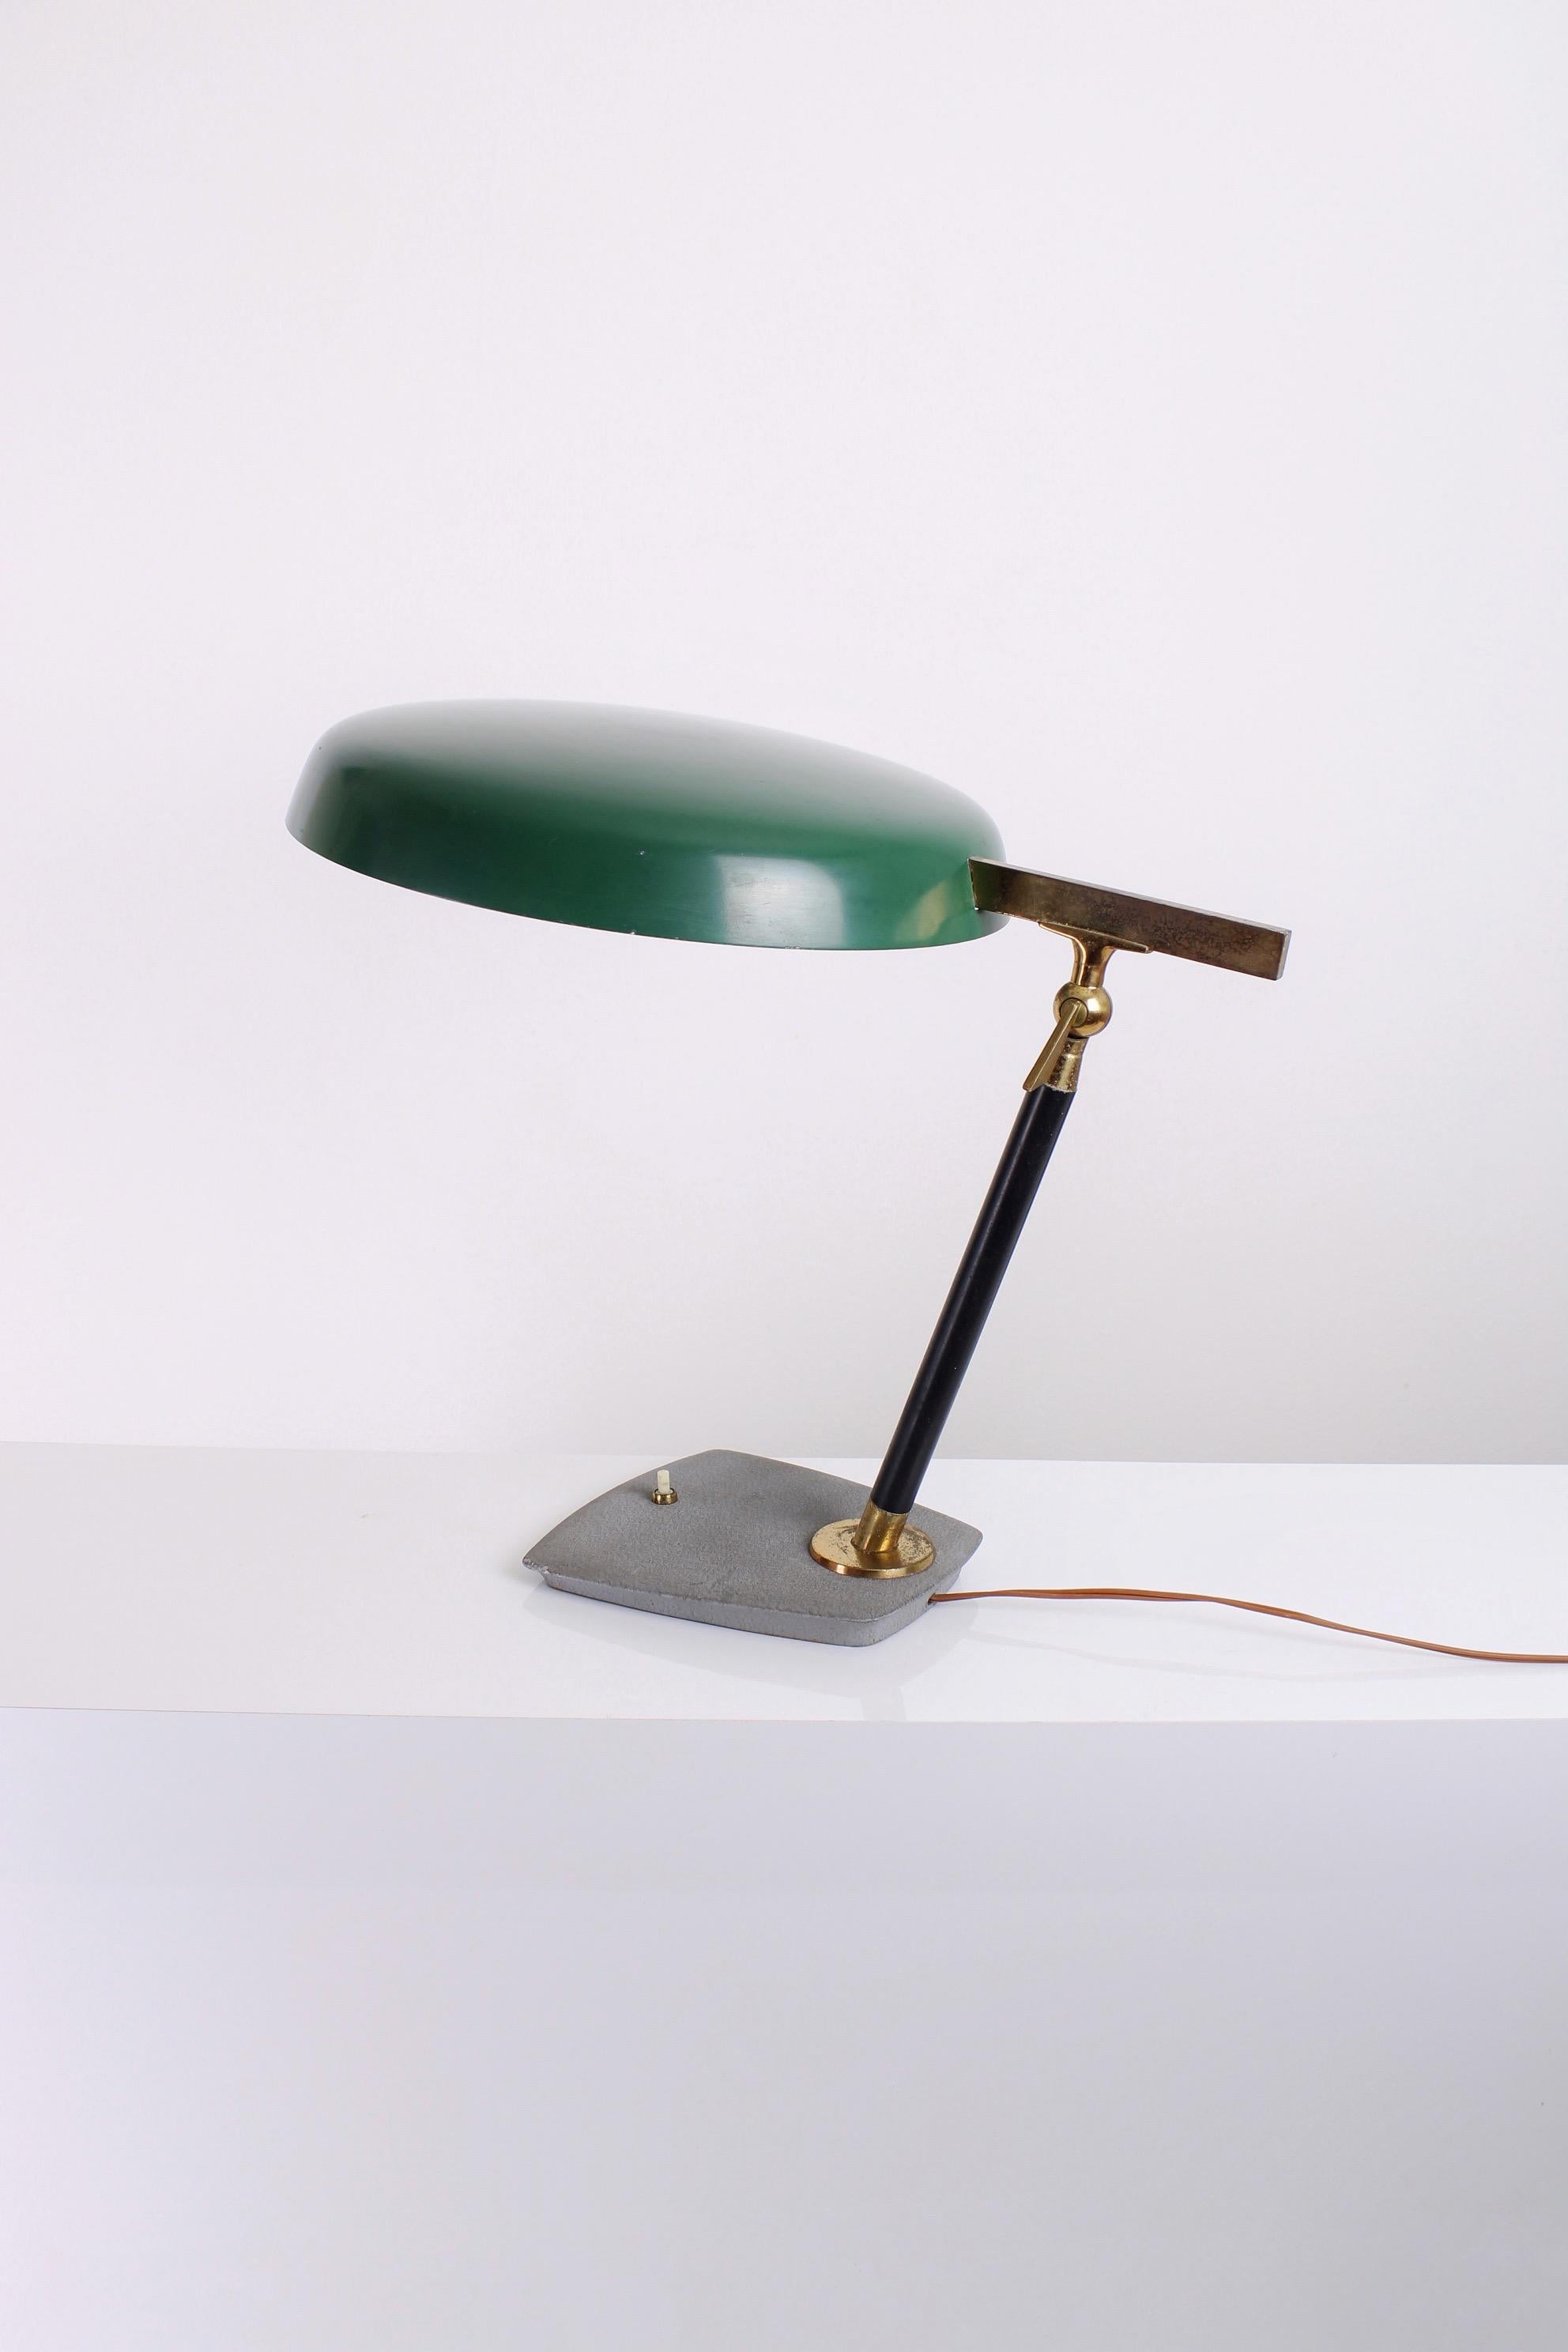 A classic Italian-style desk lamp created by the hand of Oscar Torlasco. It was designed circa 1963 and produced by the Milanese lighting manufacturer Lumi. This model 554 desk lamp is made of the highest quality materials, it consists of cast iron,